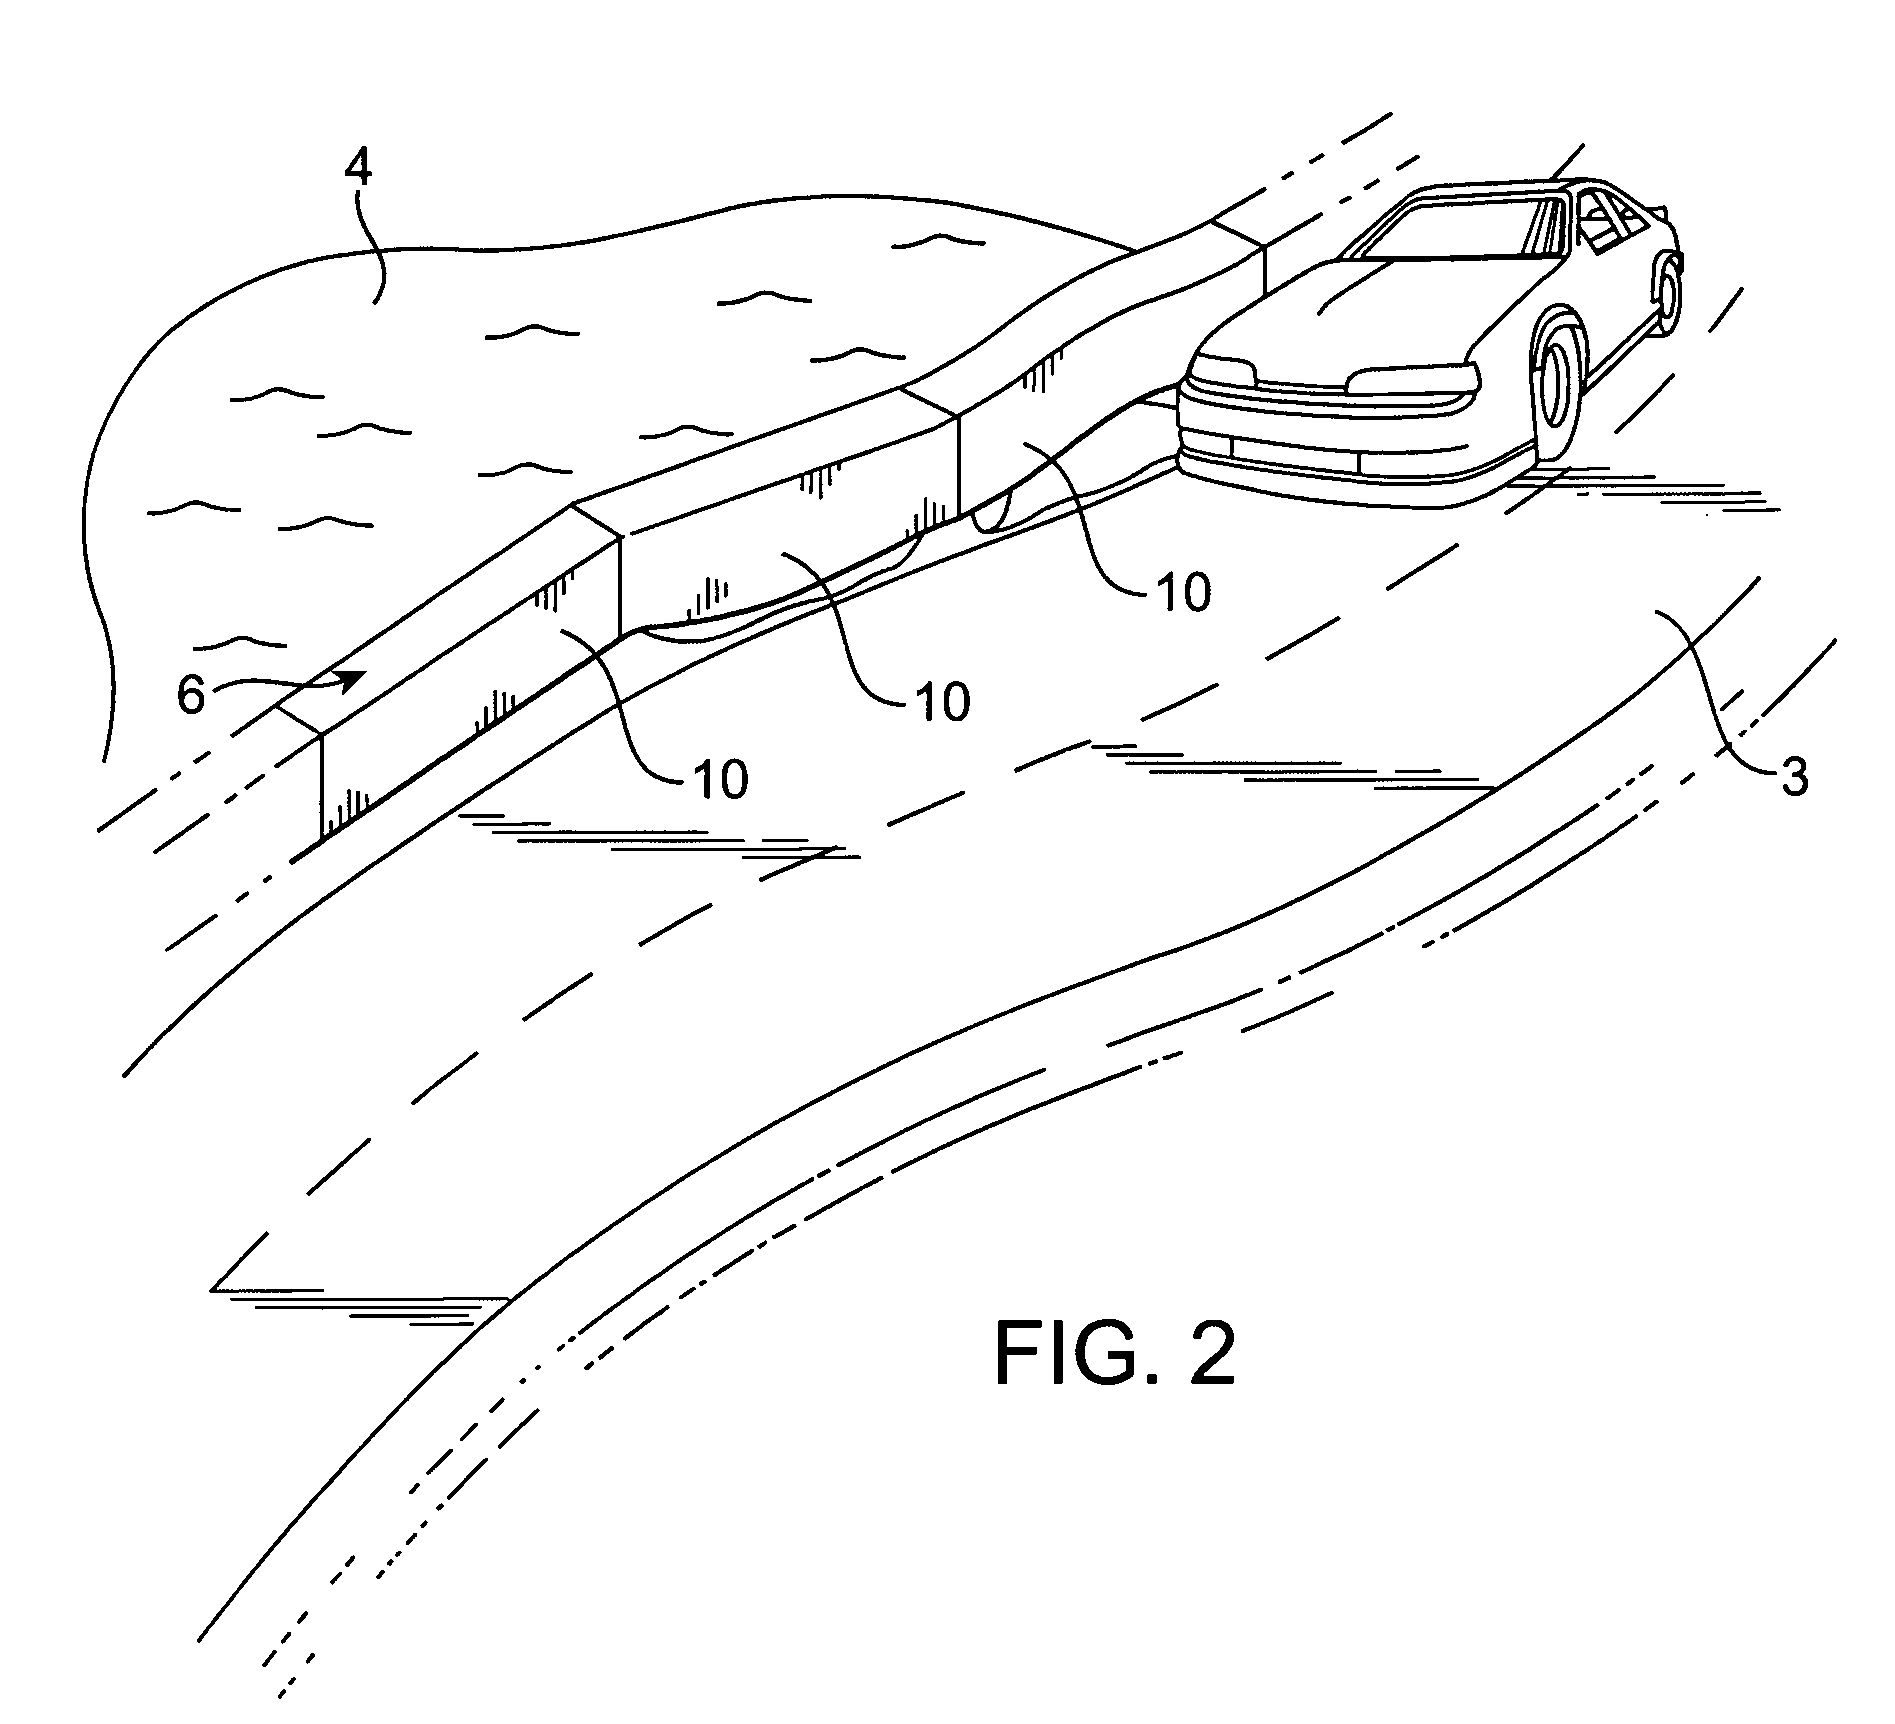 Portable dike and floatation device